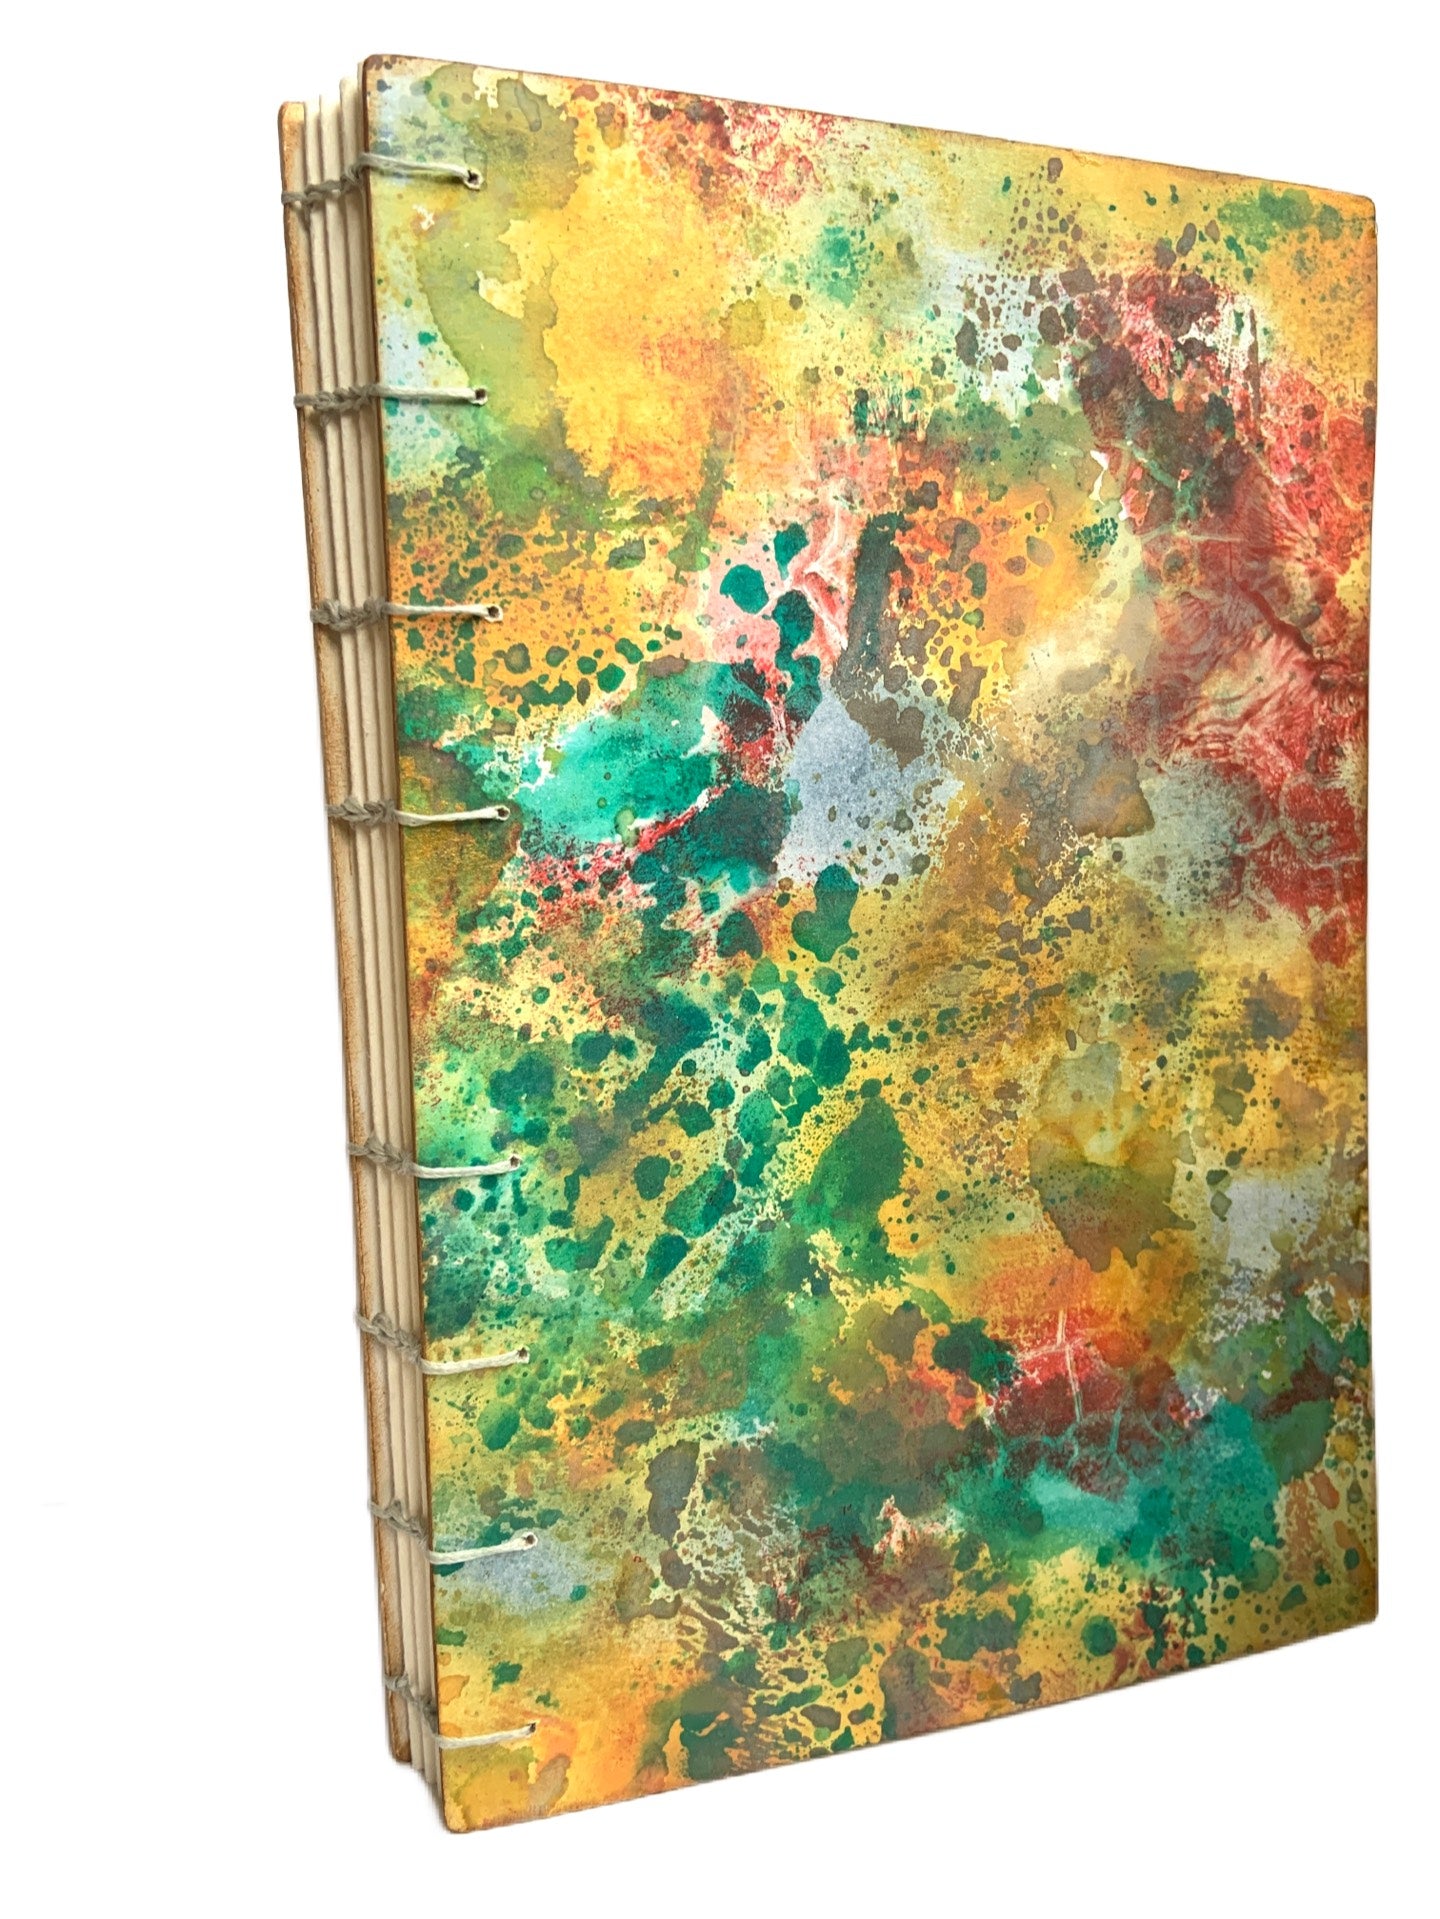 Large Journal - Mixed Media/Sketch - Abstract Distress Ink